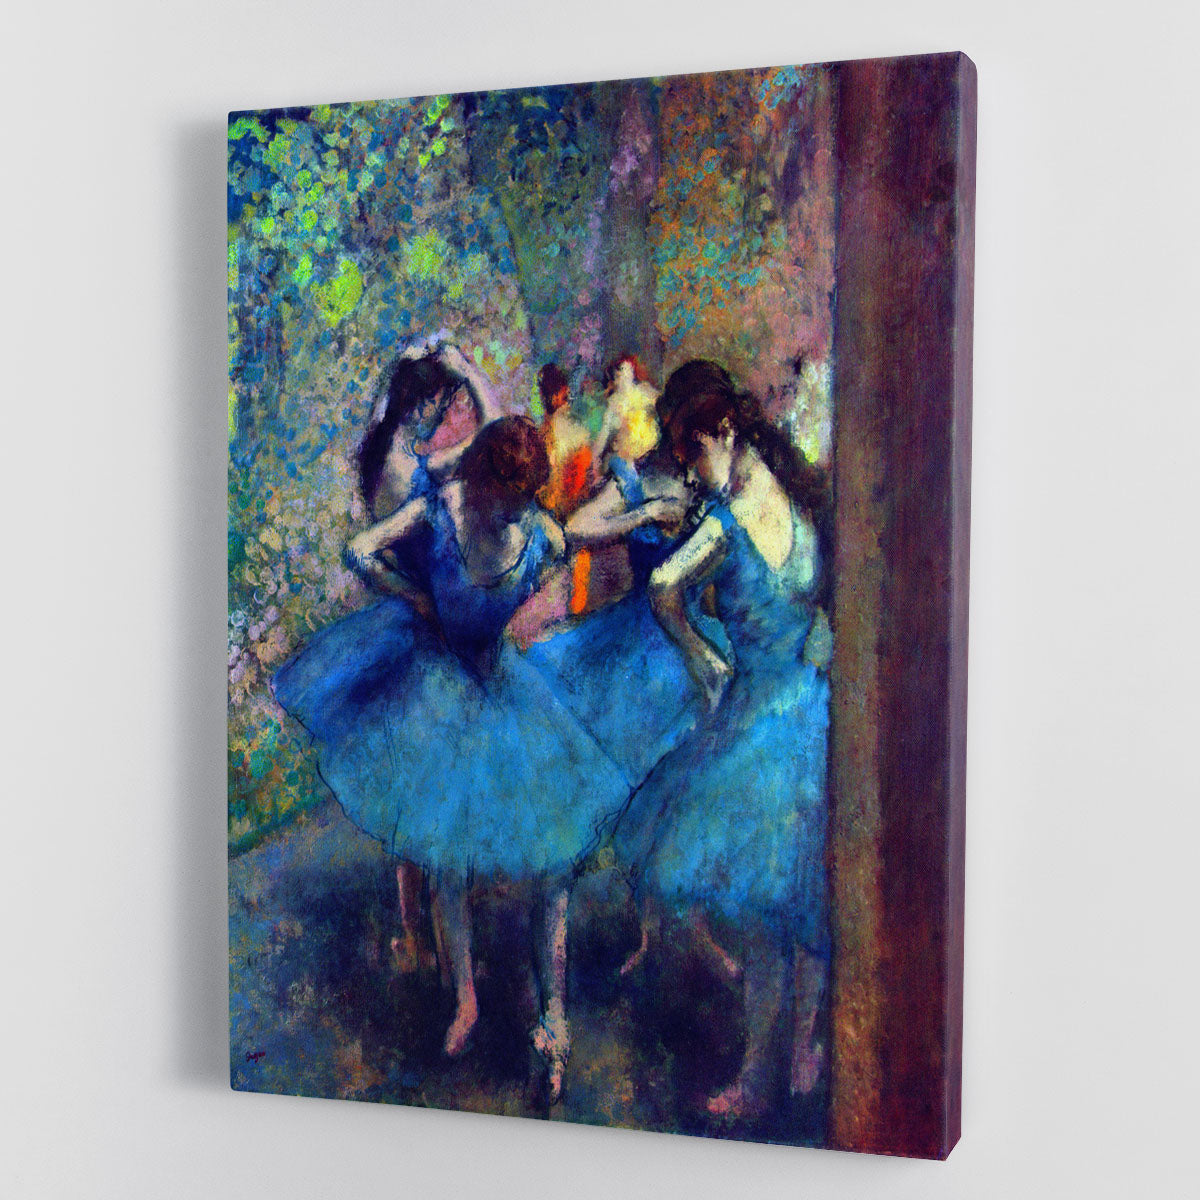 Dancers 1 by Degas Canvas Print or Poster - Canvas Art Rocks - 1